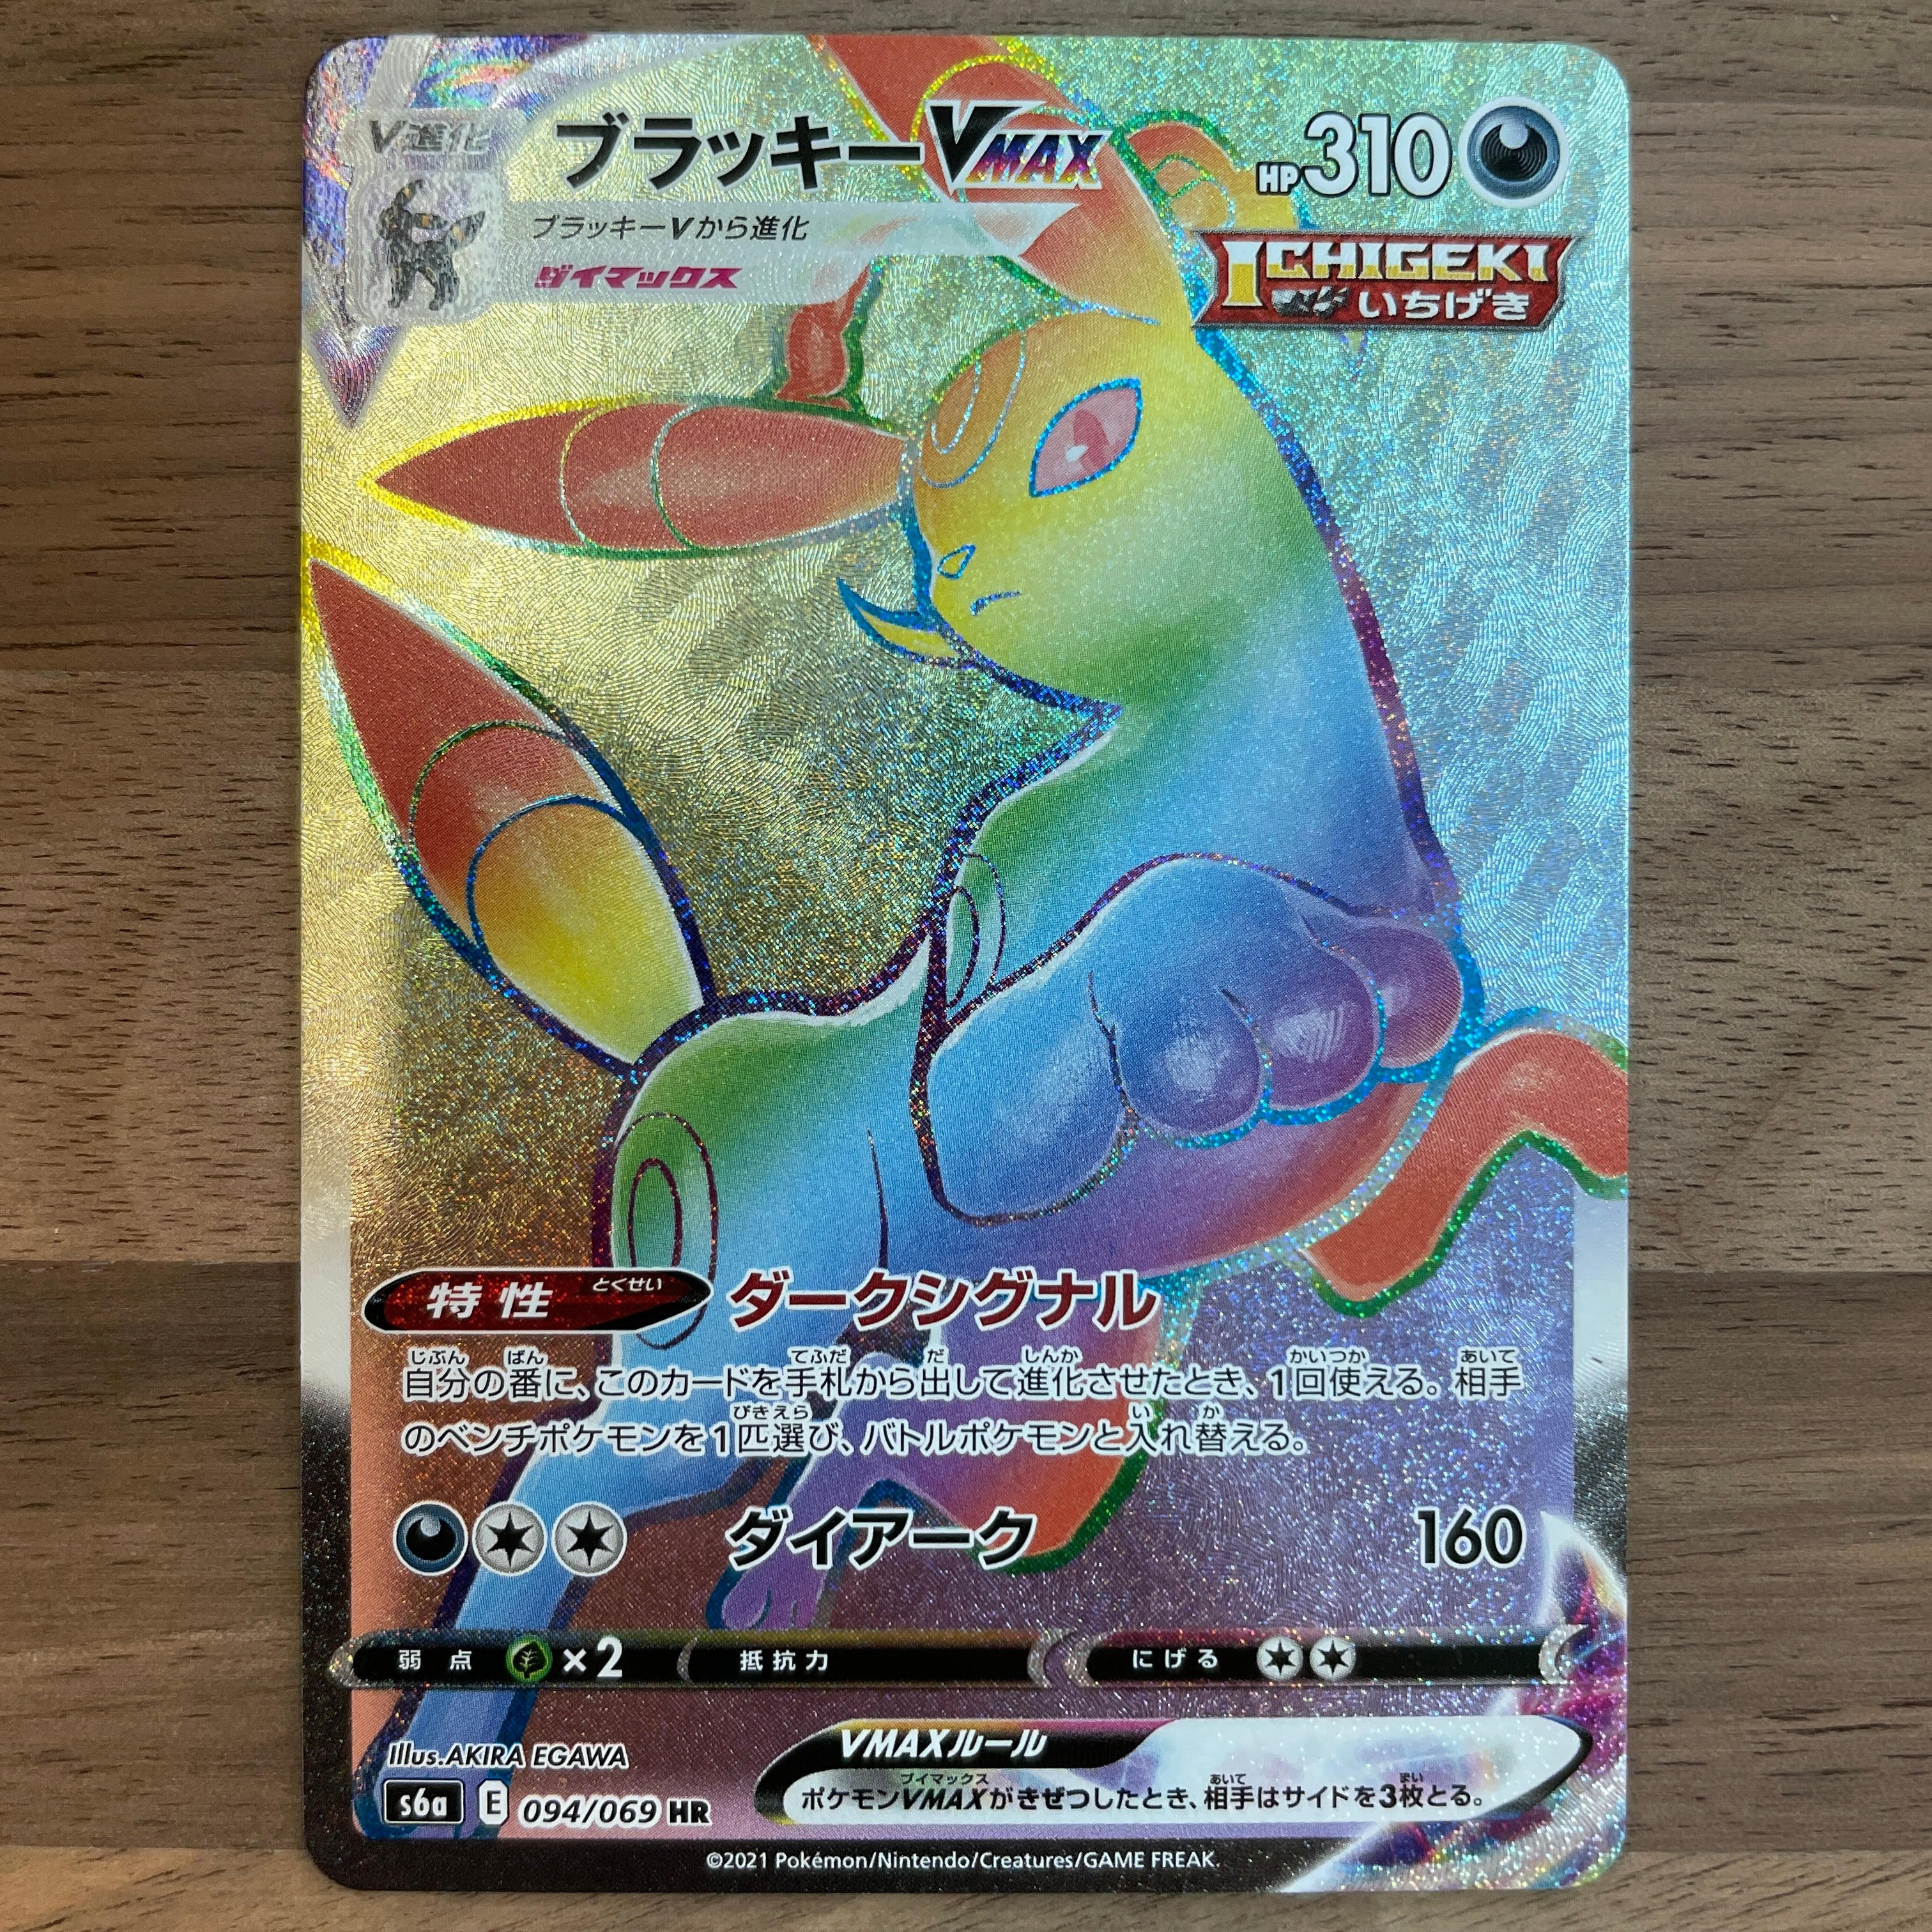 POKÉMON CARD GAME Sword & Shield Expansion pack ｢Eevee Heroes｣  POKÉMON CARD GAME s6a 094/069 Hyper Rare card  Umbreon VMAX